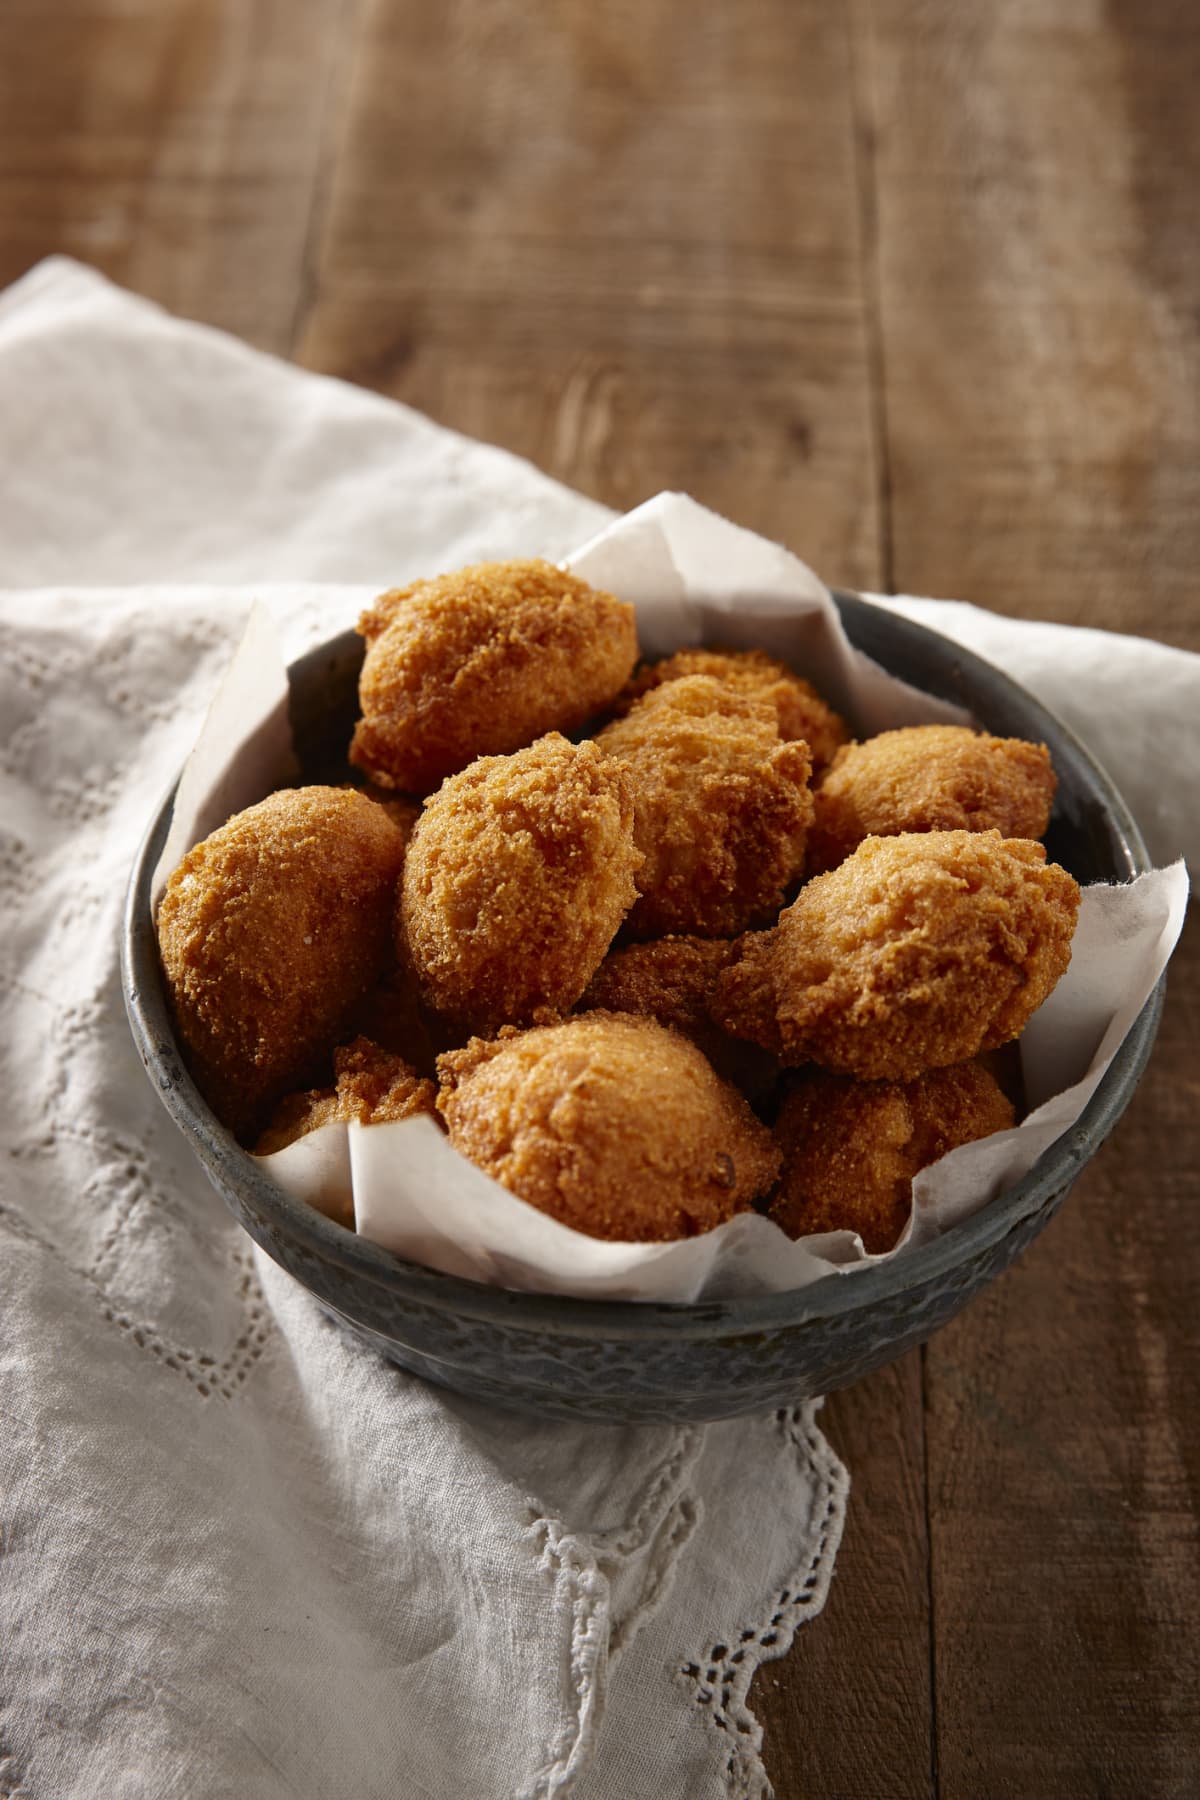 Southern style hush puppies or fried corn balls